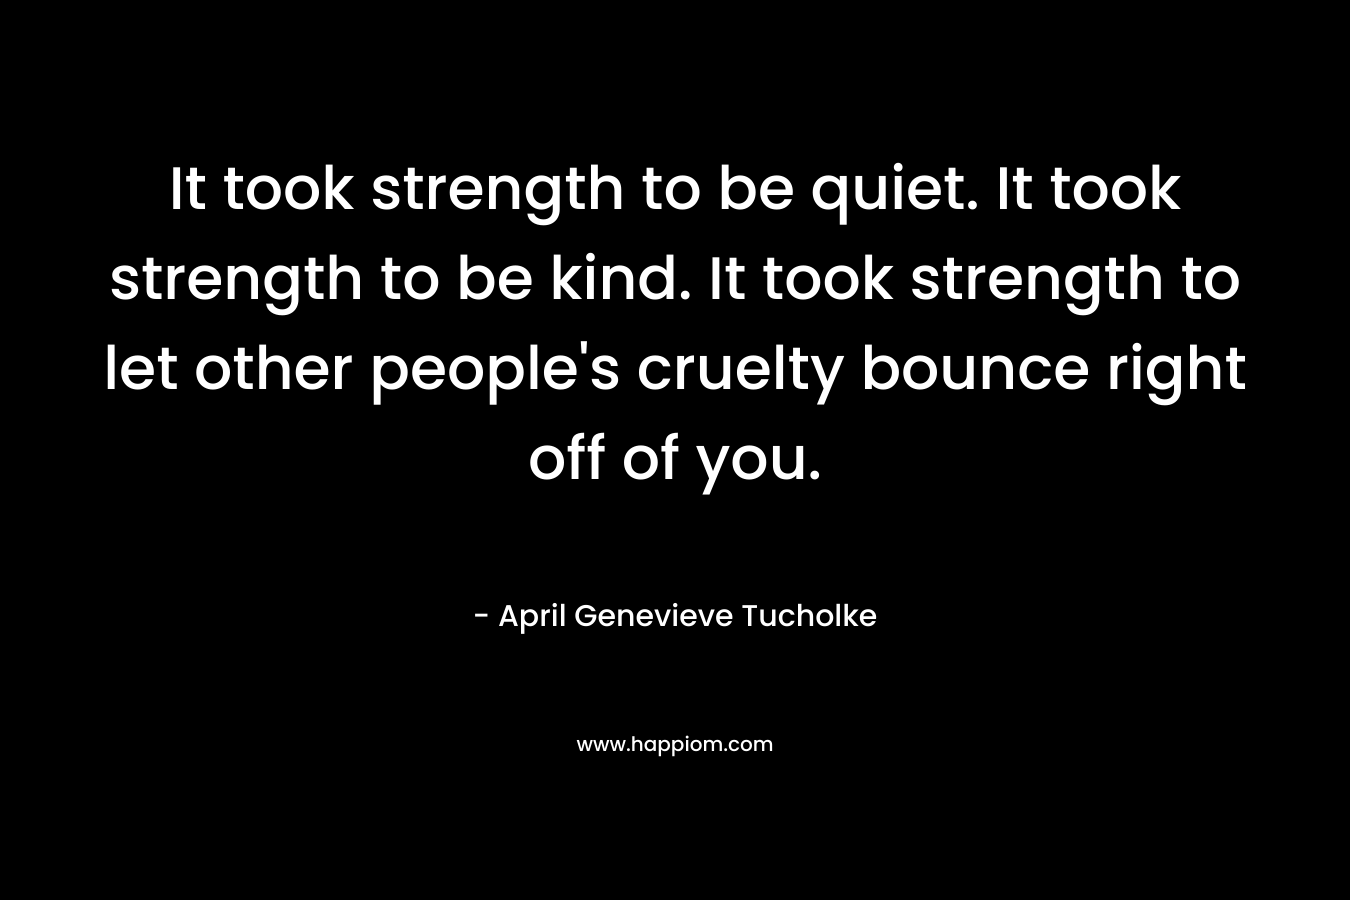 It took strength to be quiet. It took strength to be kind. It took strength to let other people’s cruelty bounce right off of you. – April Genevieve Tucholke